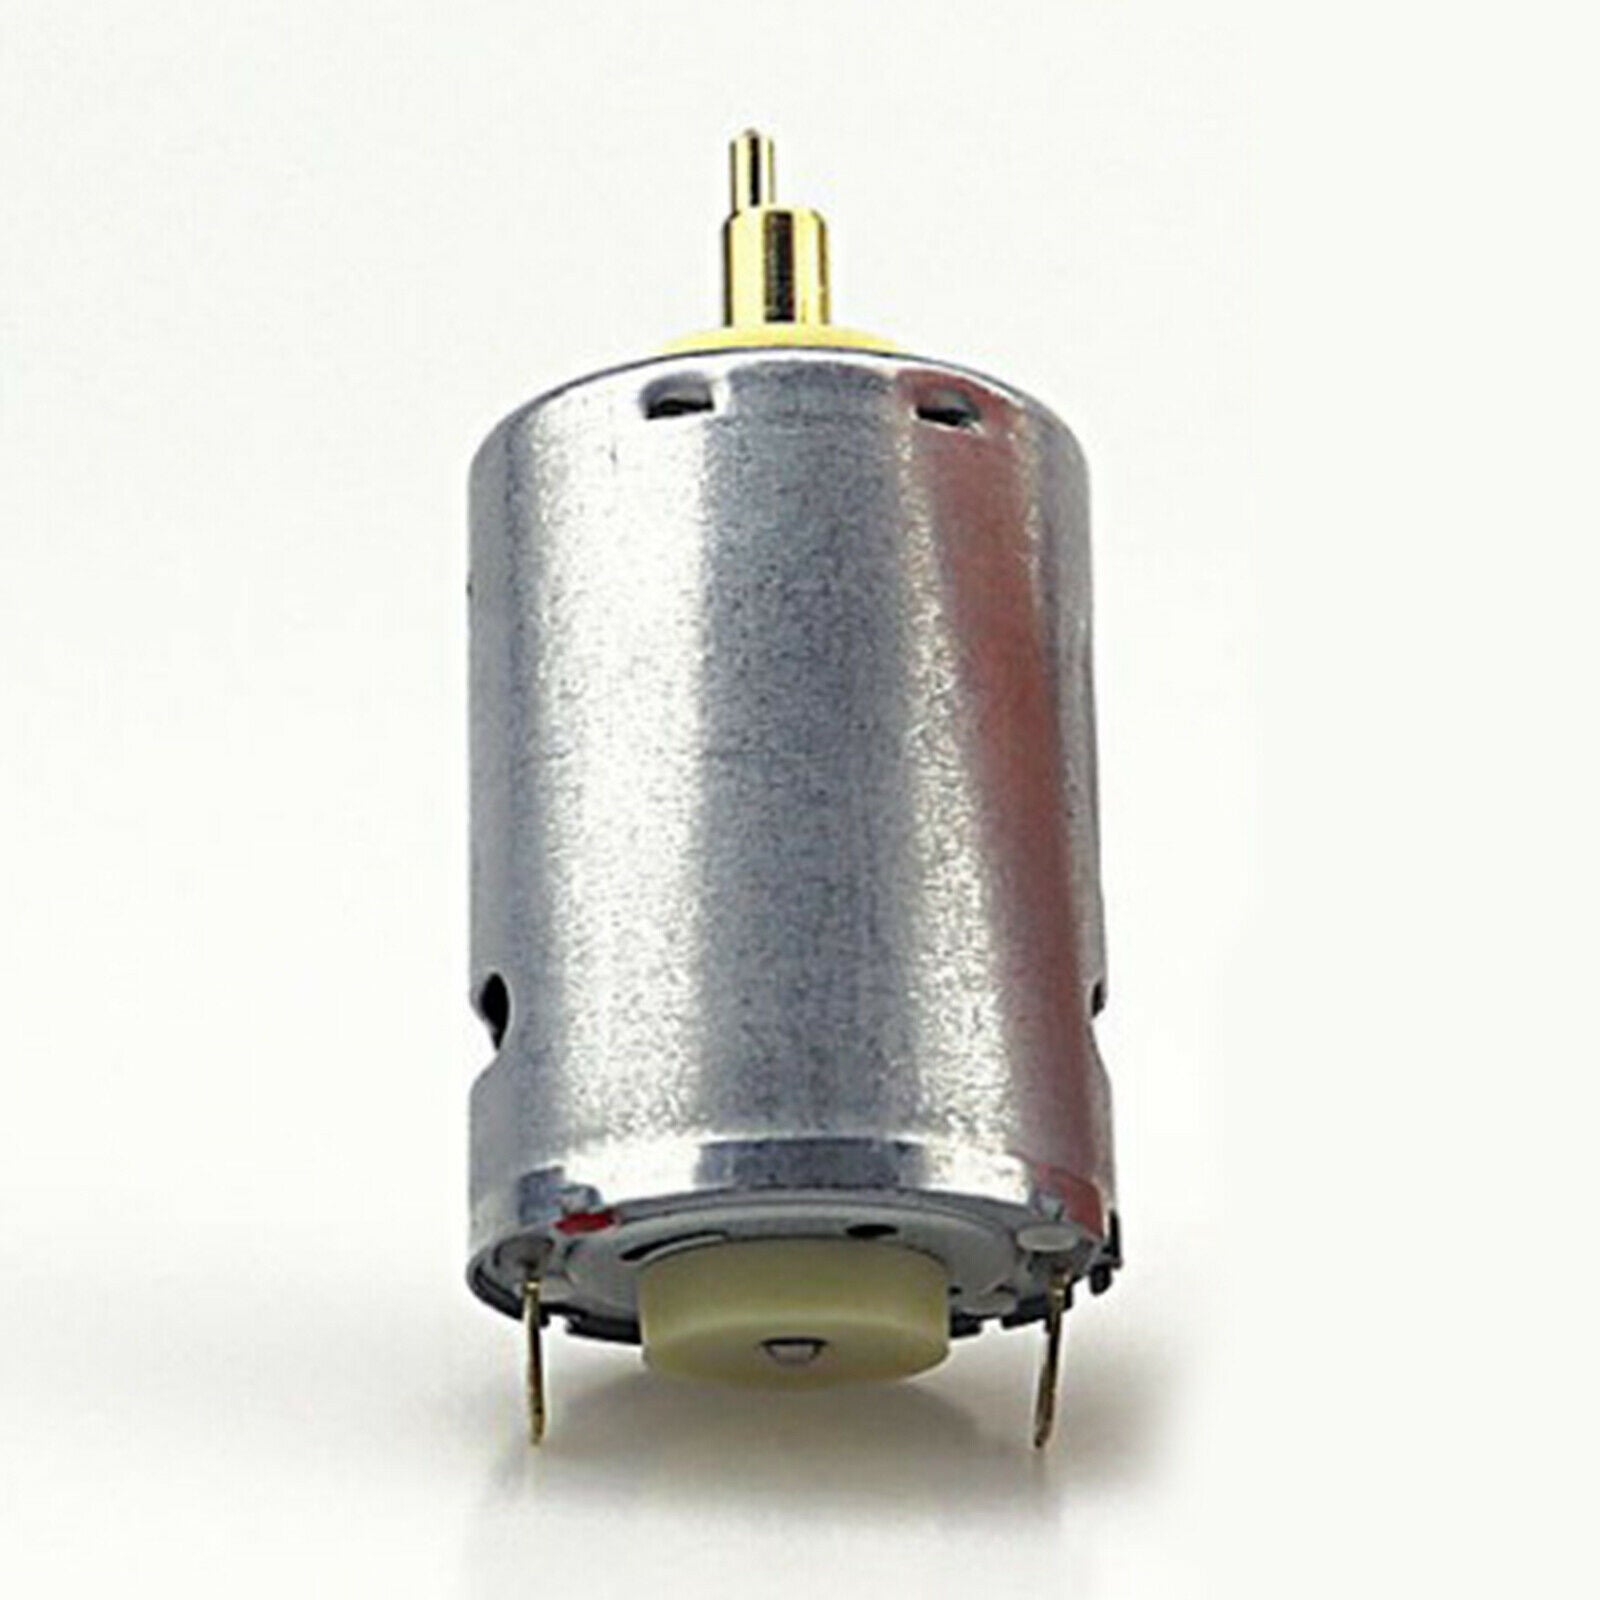 Electric Rotary Motor Replaces fits for Wahl 8148 8591 Hair Clippers Parts